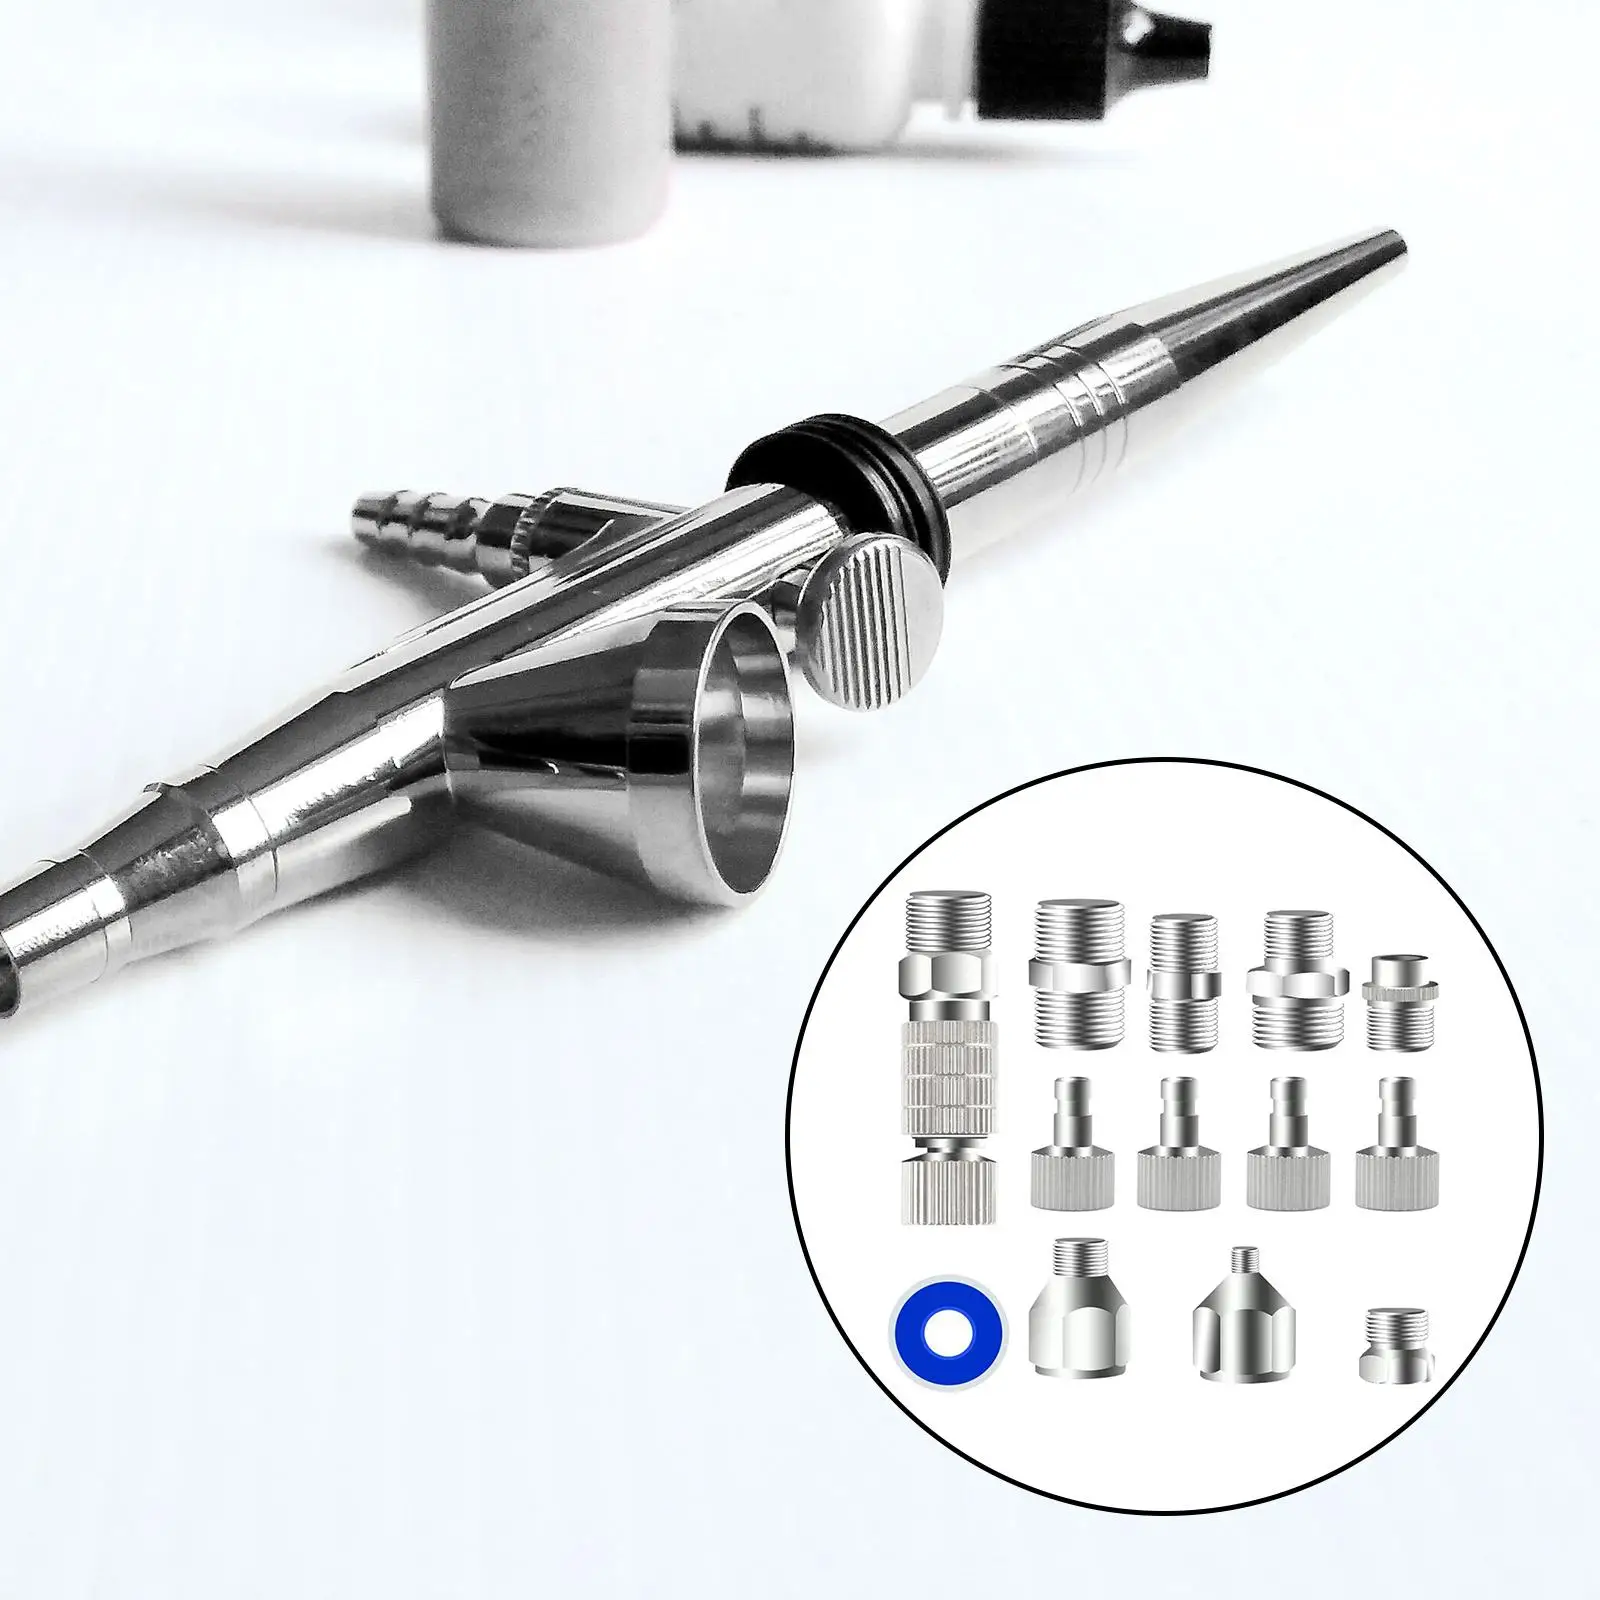 

13x Airbrush Adaptor Set Airbrush Connector for Air Brush Sturdy Repair Tool Fittings Airbrush Coupling Disconnect Adapter Set